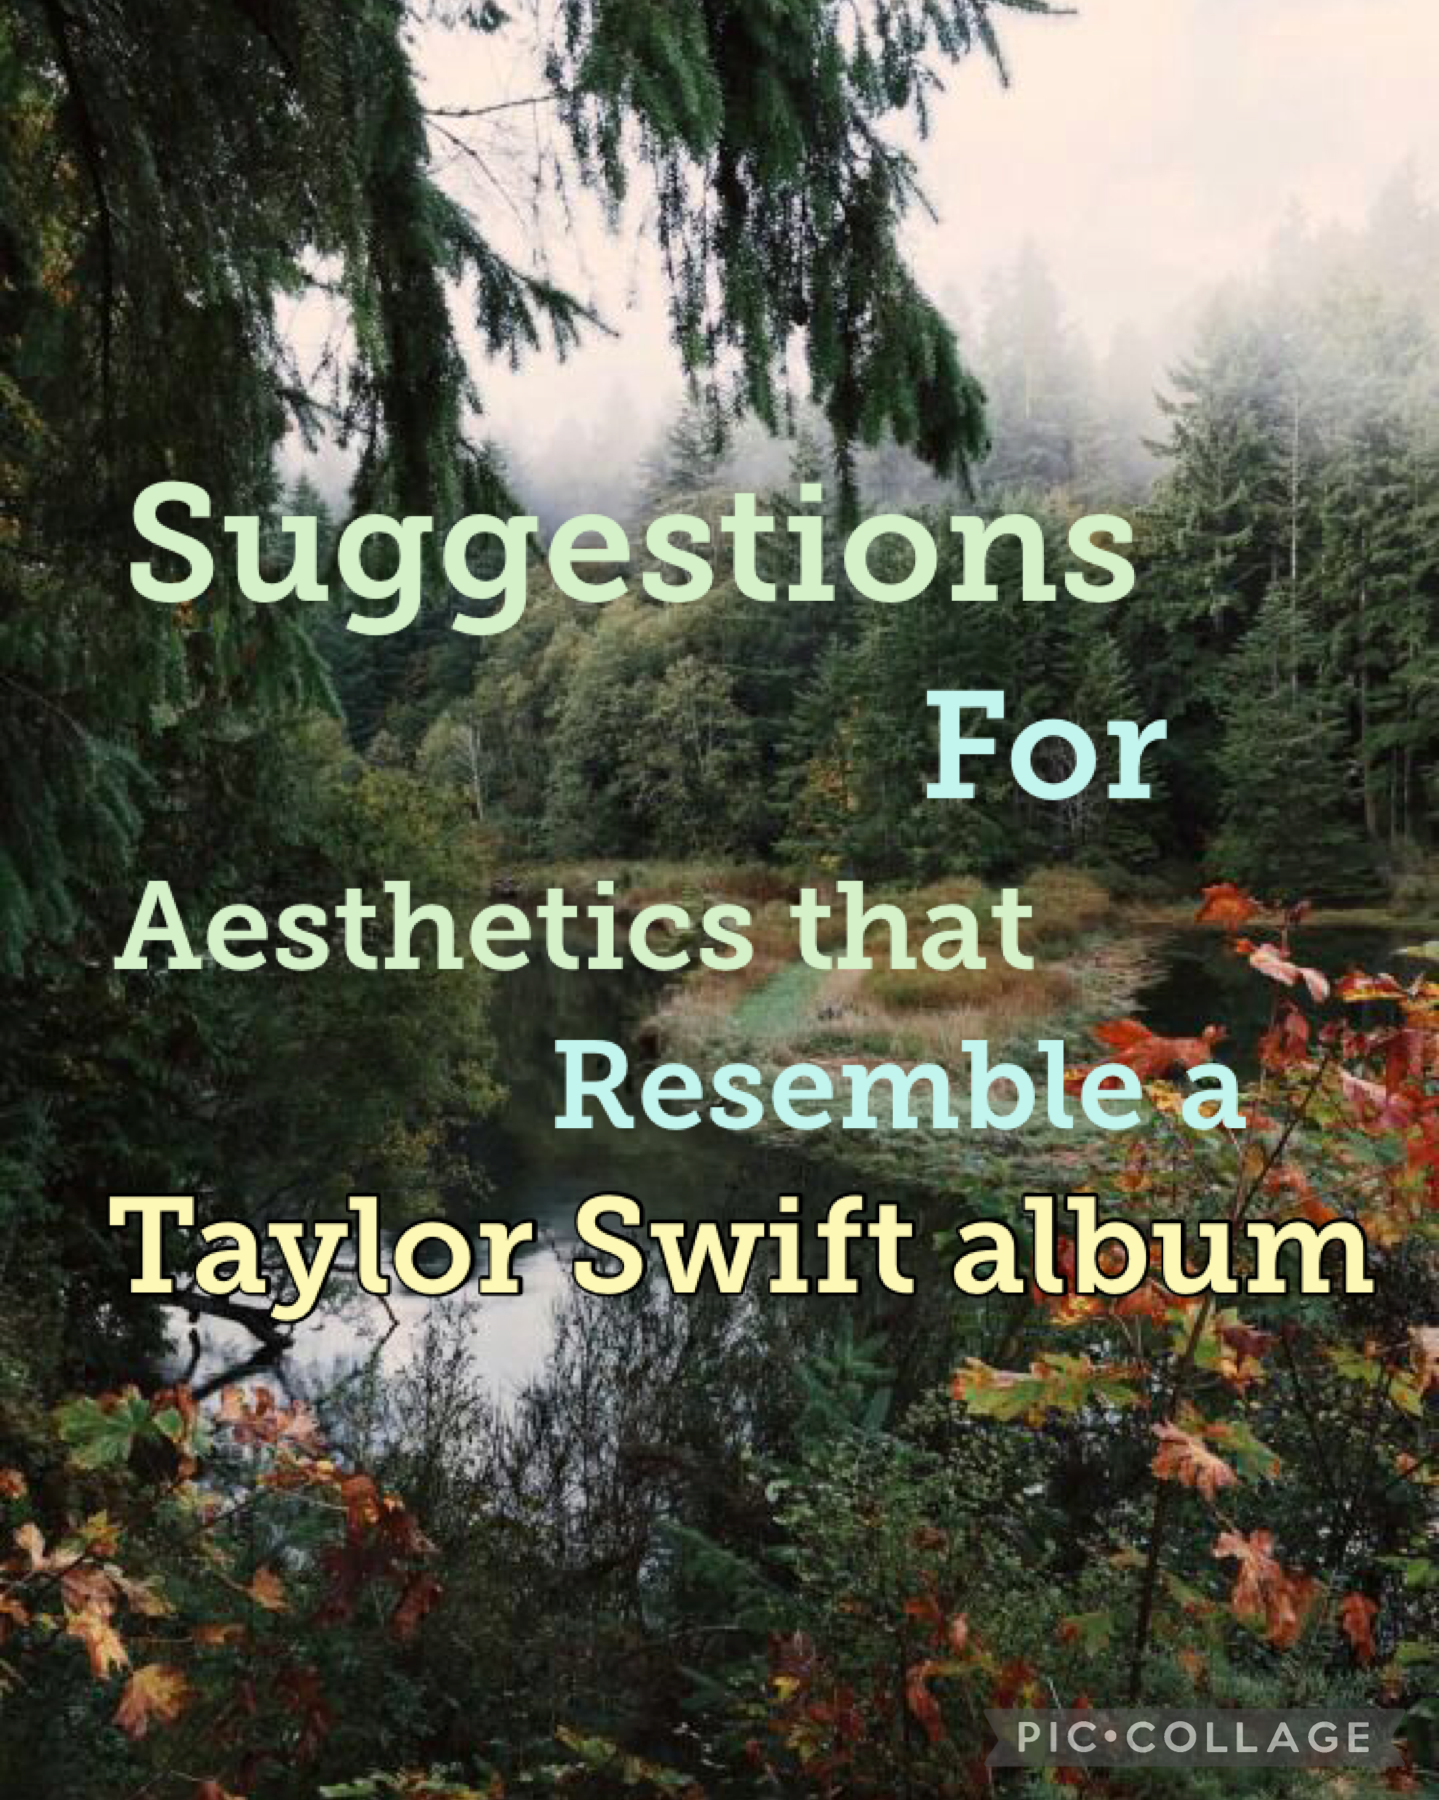 Suggestions for aesthetics that resemble a Taylor Swift album 